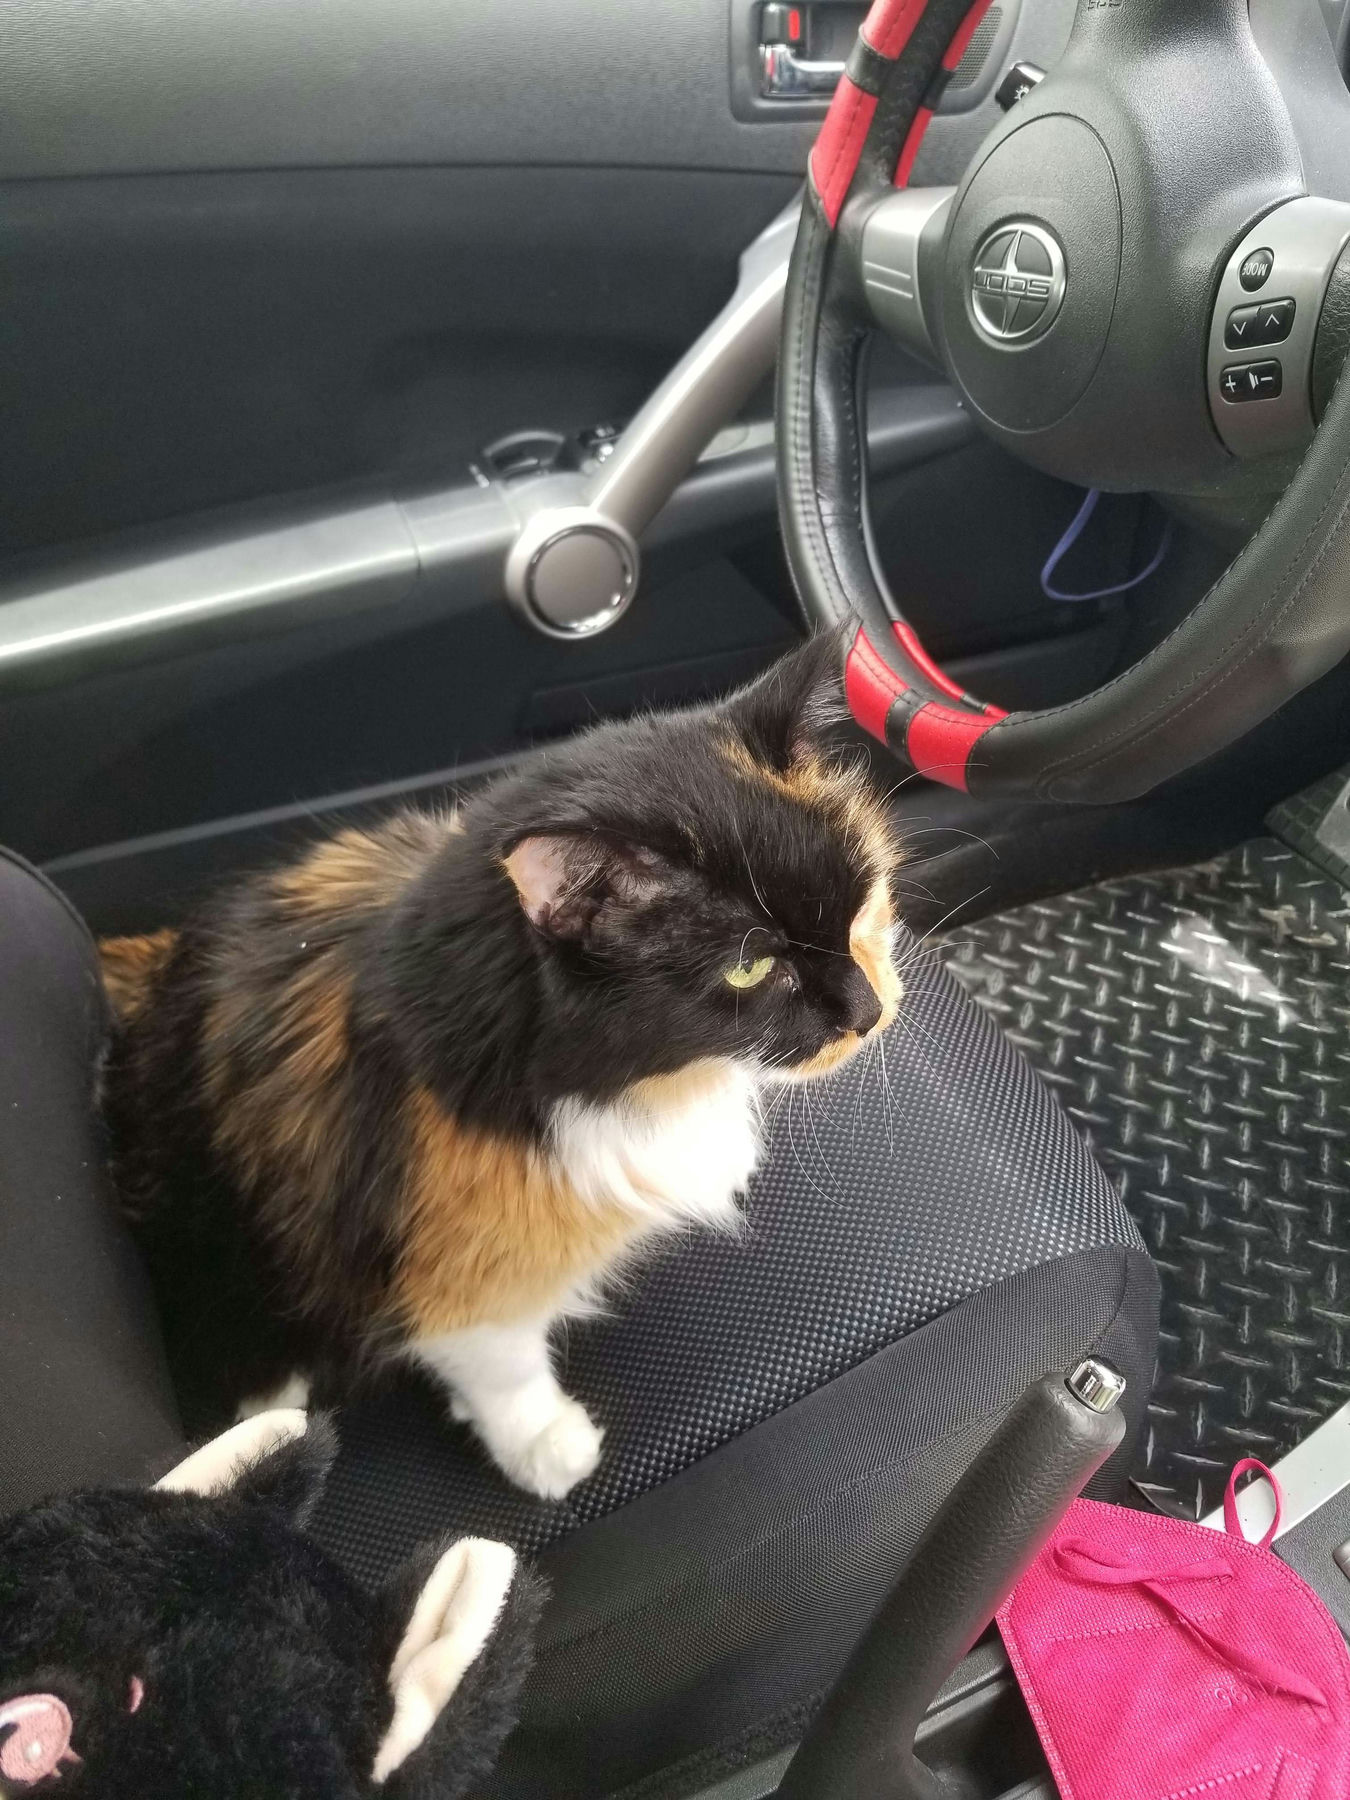 A fluffy cat sitting in the driver's seat of a car.